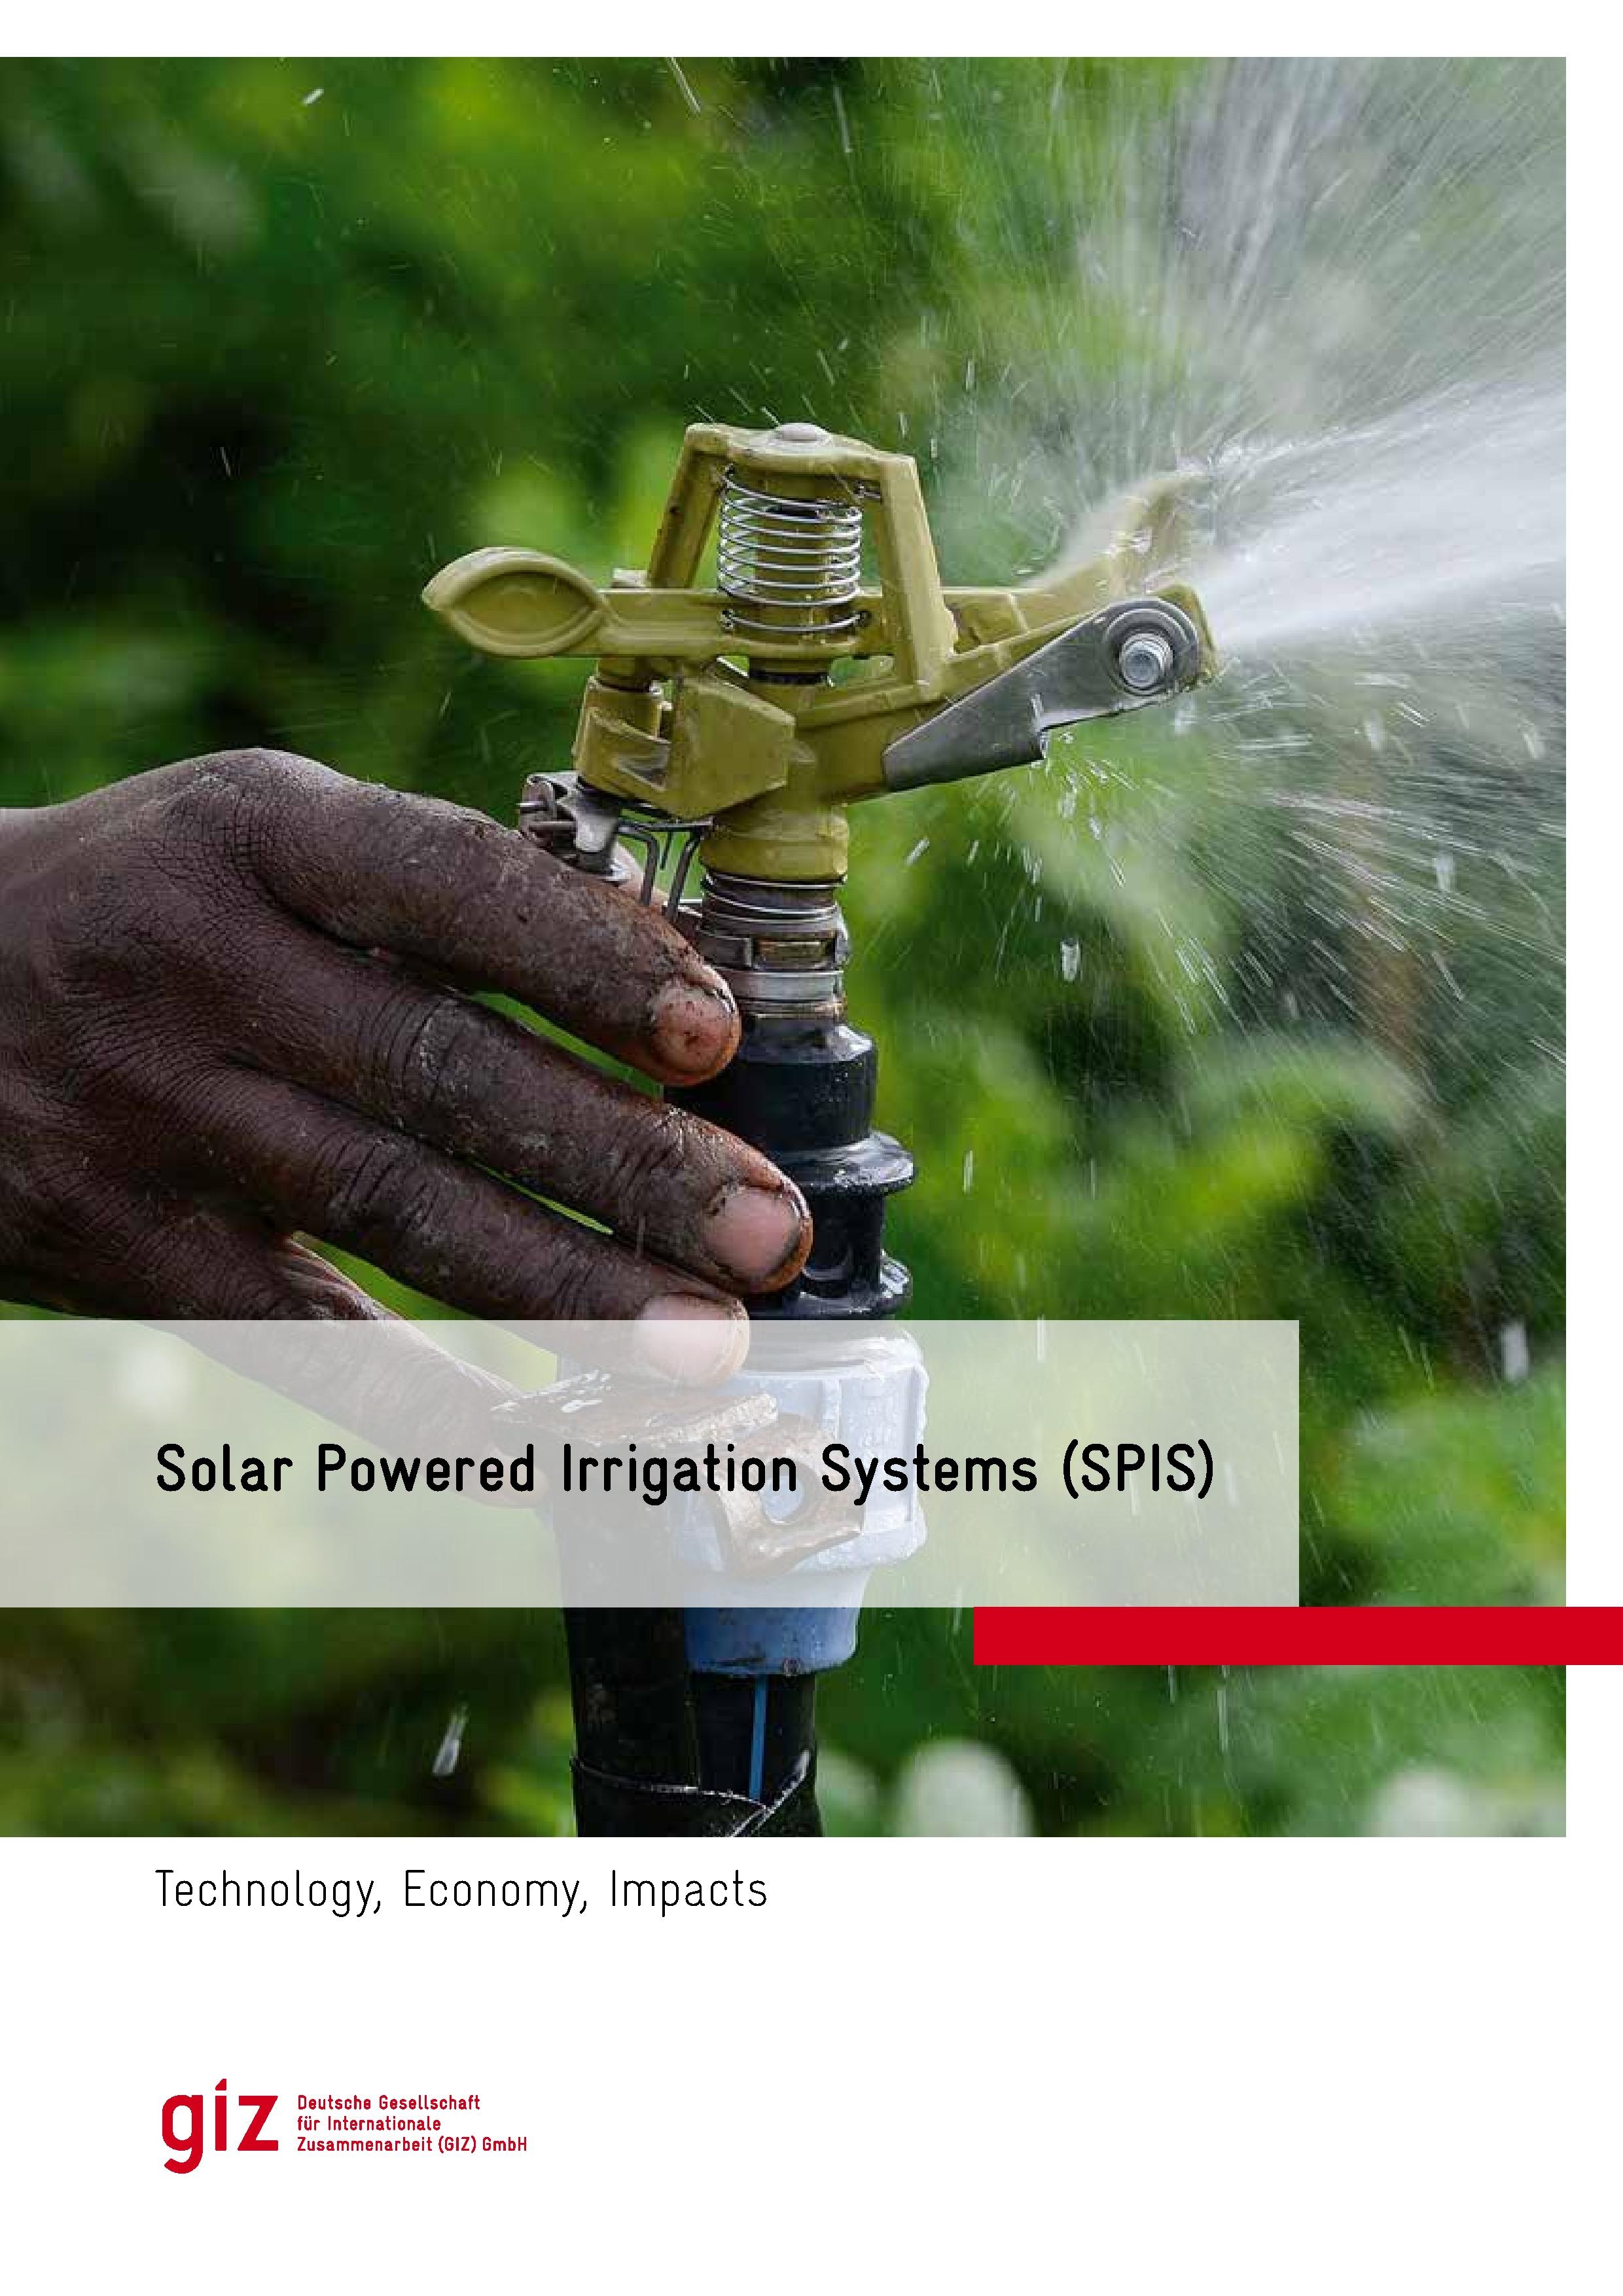 Solar Powered Irrigation Systems (SPIS) - Technology, Economy Impacts